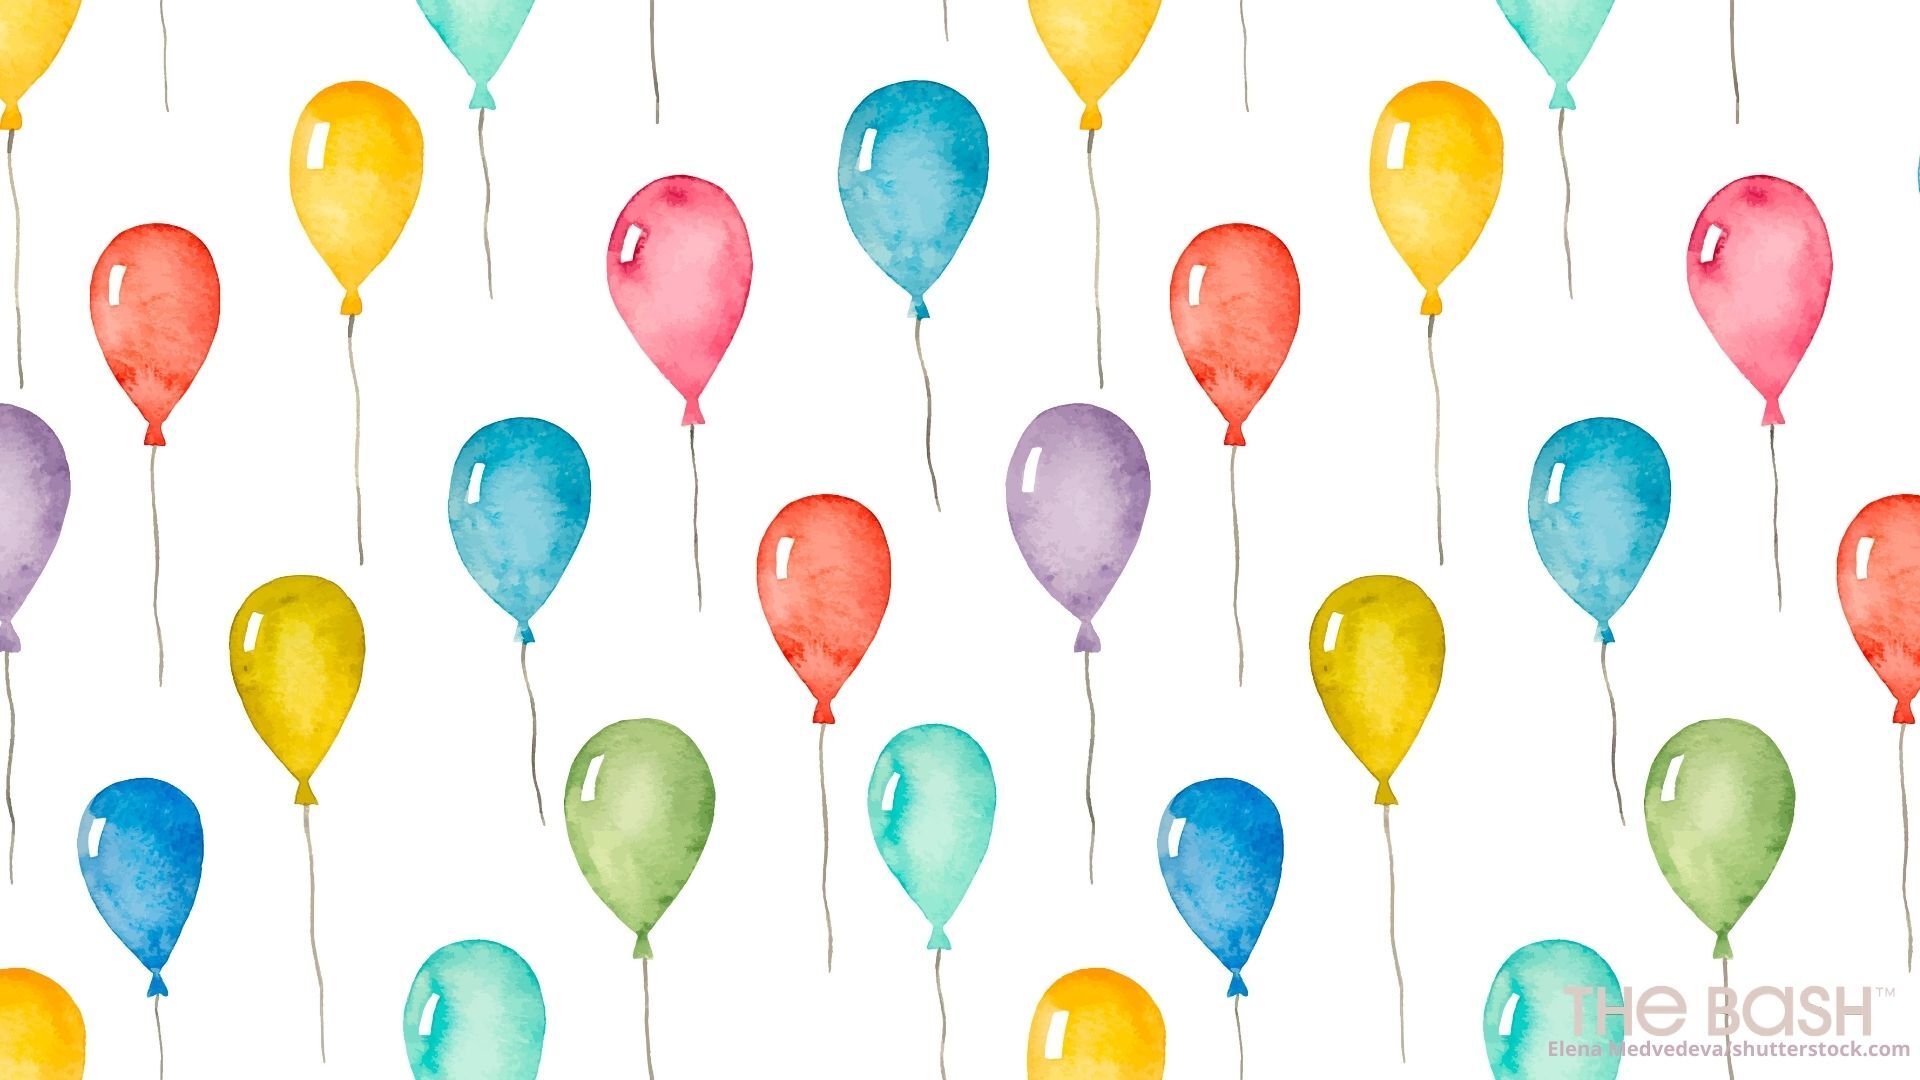 33 Adult's Birthday Zoom Backgrounds - Free Download - The Bash